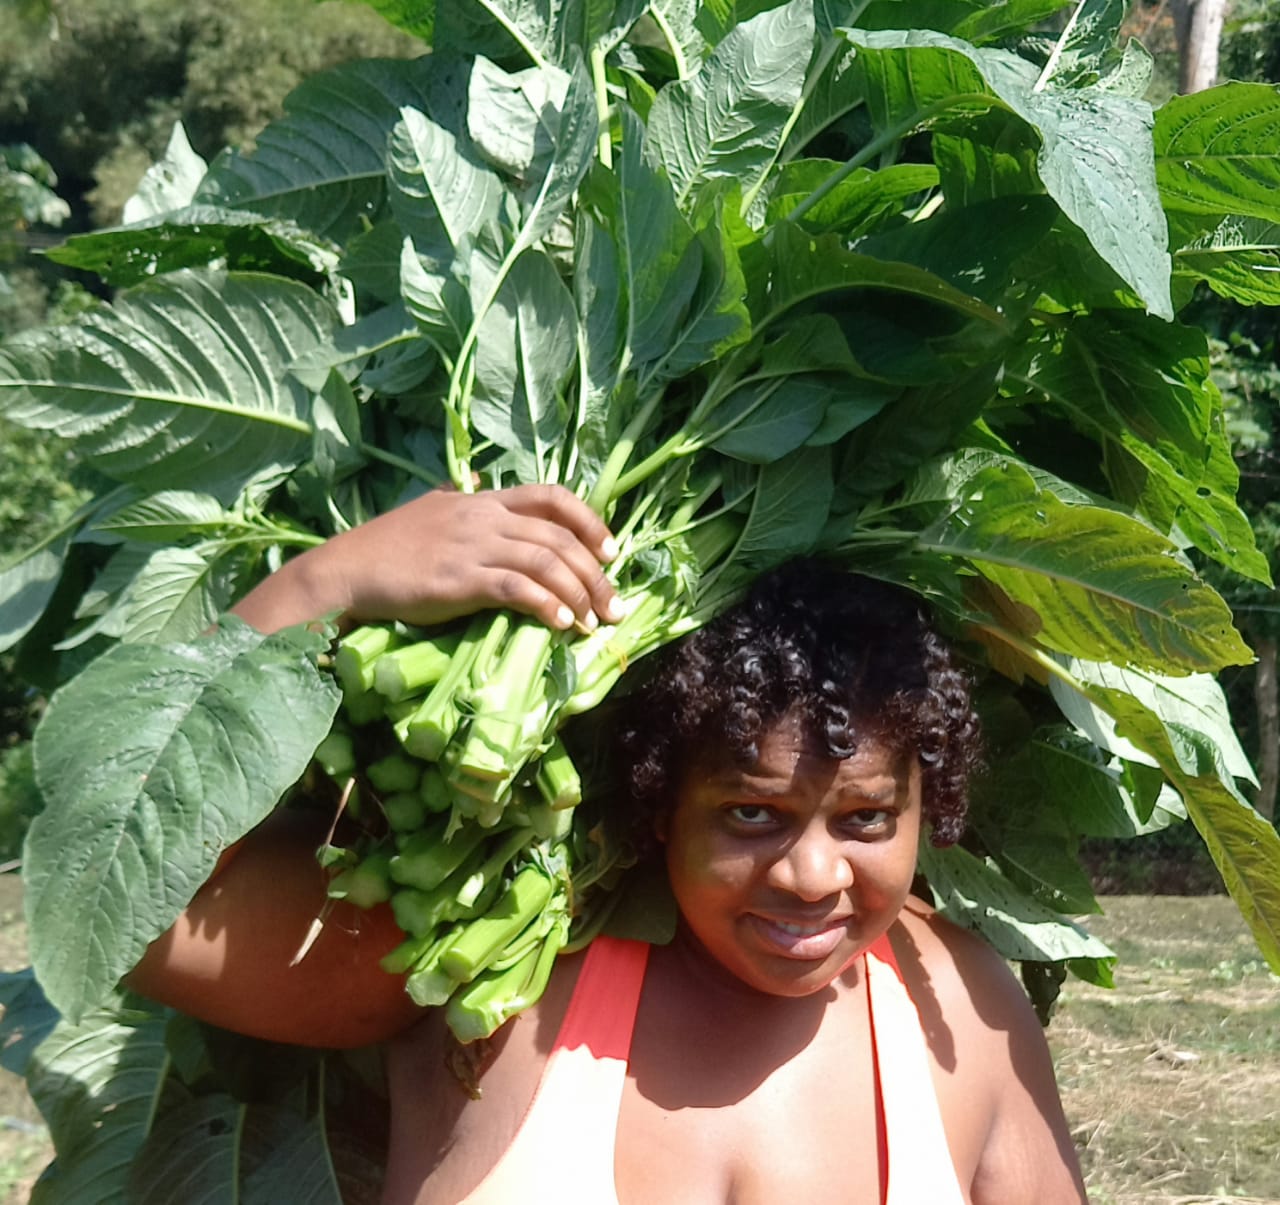 Shennelle Herbert harvesting bhaji (spinach) on her farm in Bloody Bay, Tobago (Photo provided by Ms. Herbert)